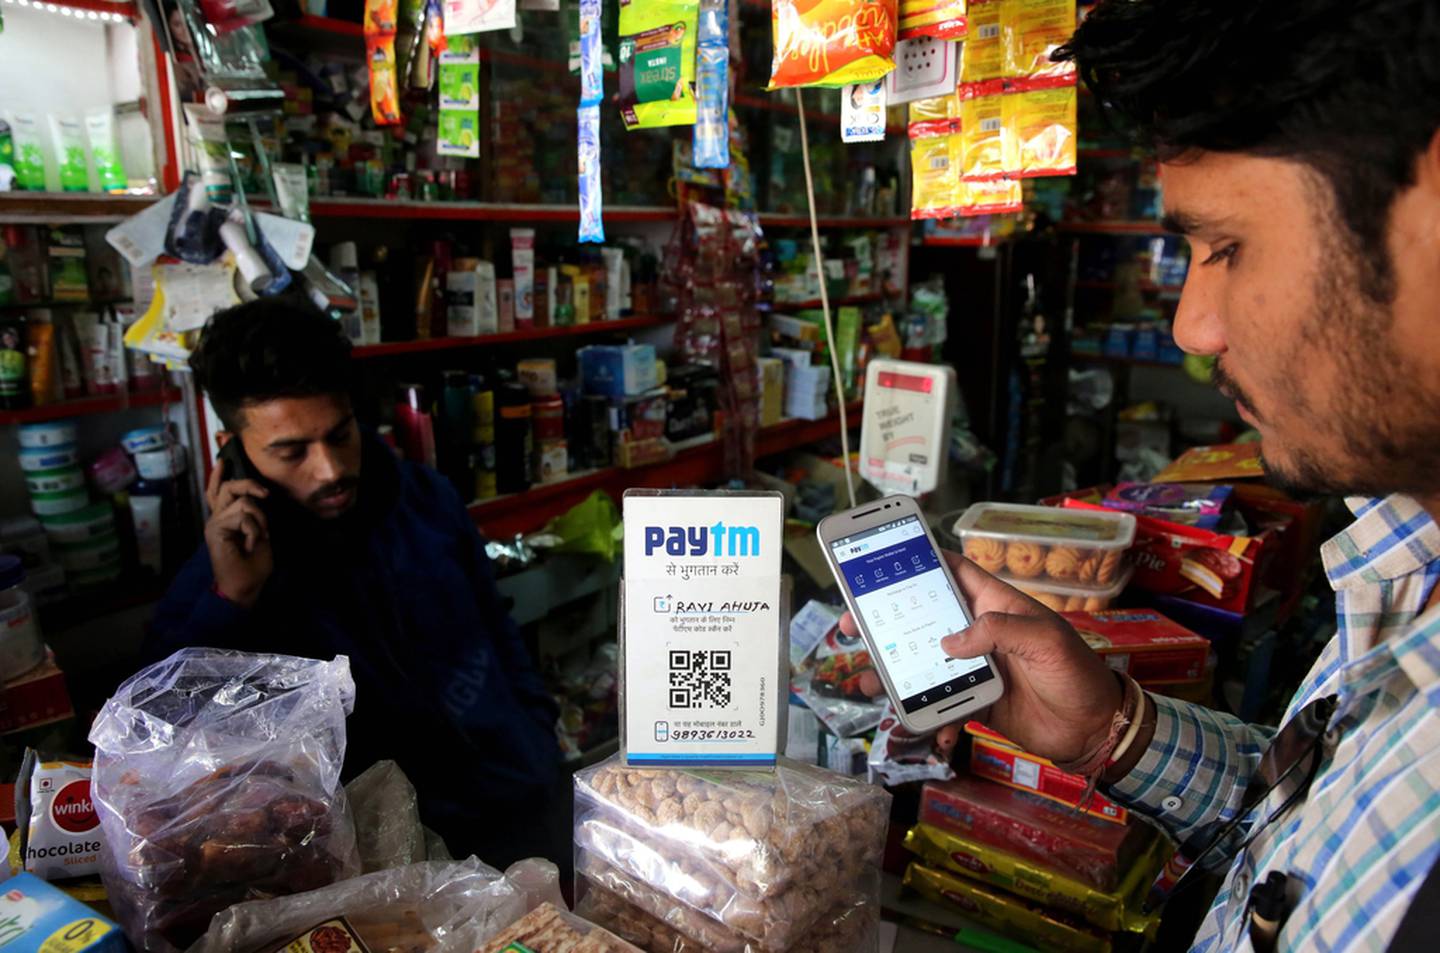 An Indian shopkeeper receives payment by paytm mobile phone technology in Bhopal. EPA